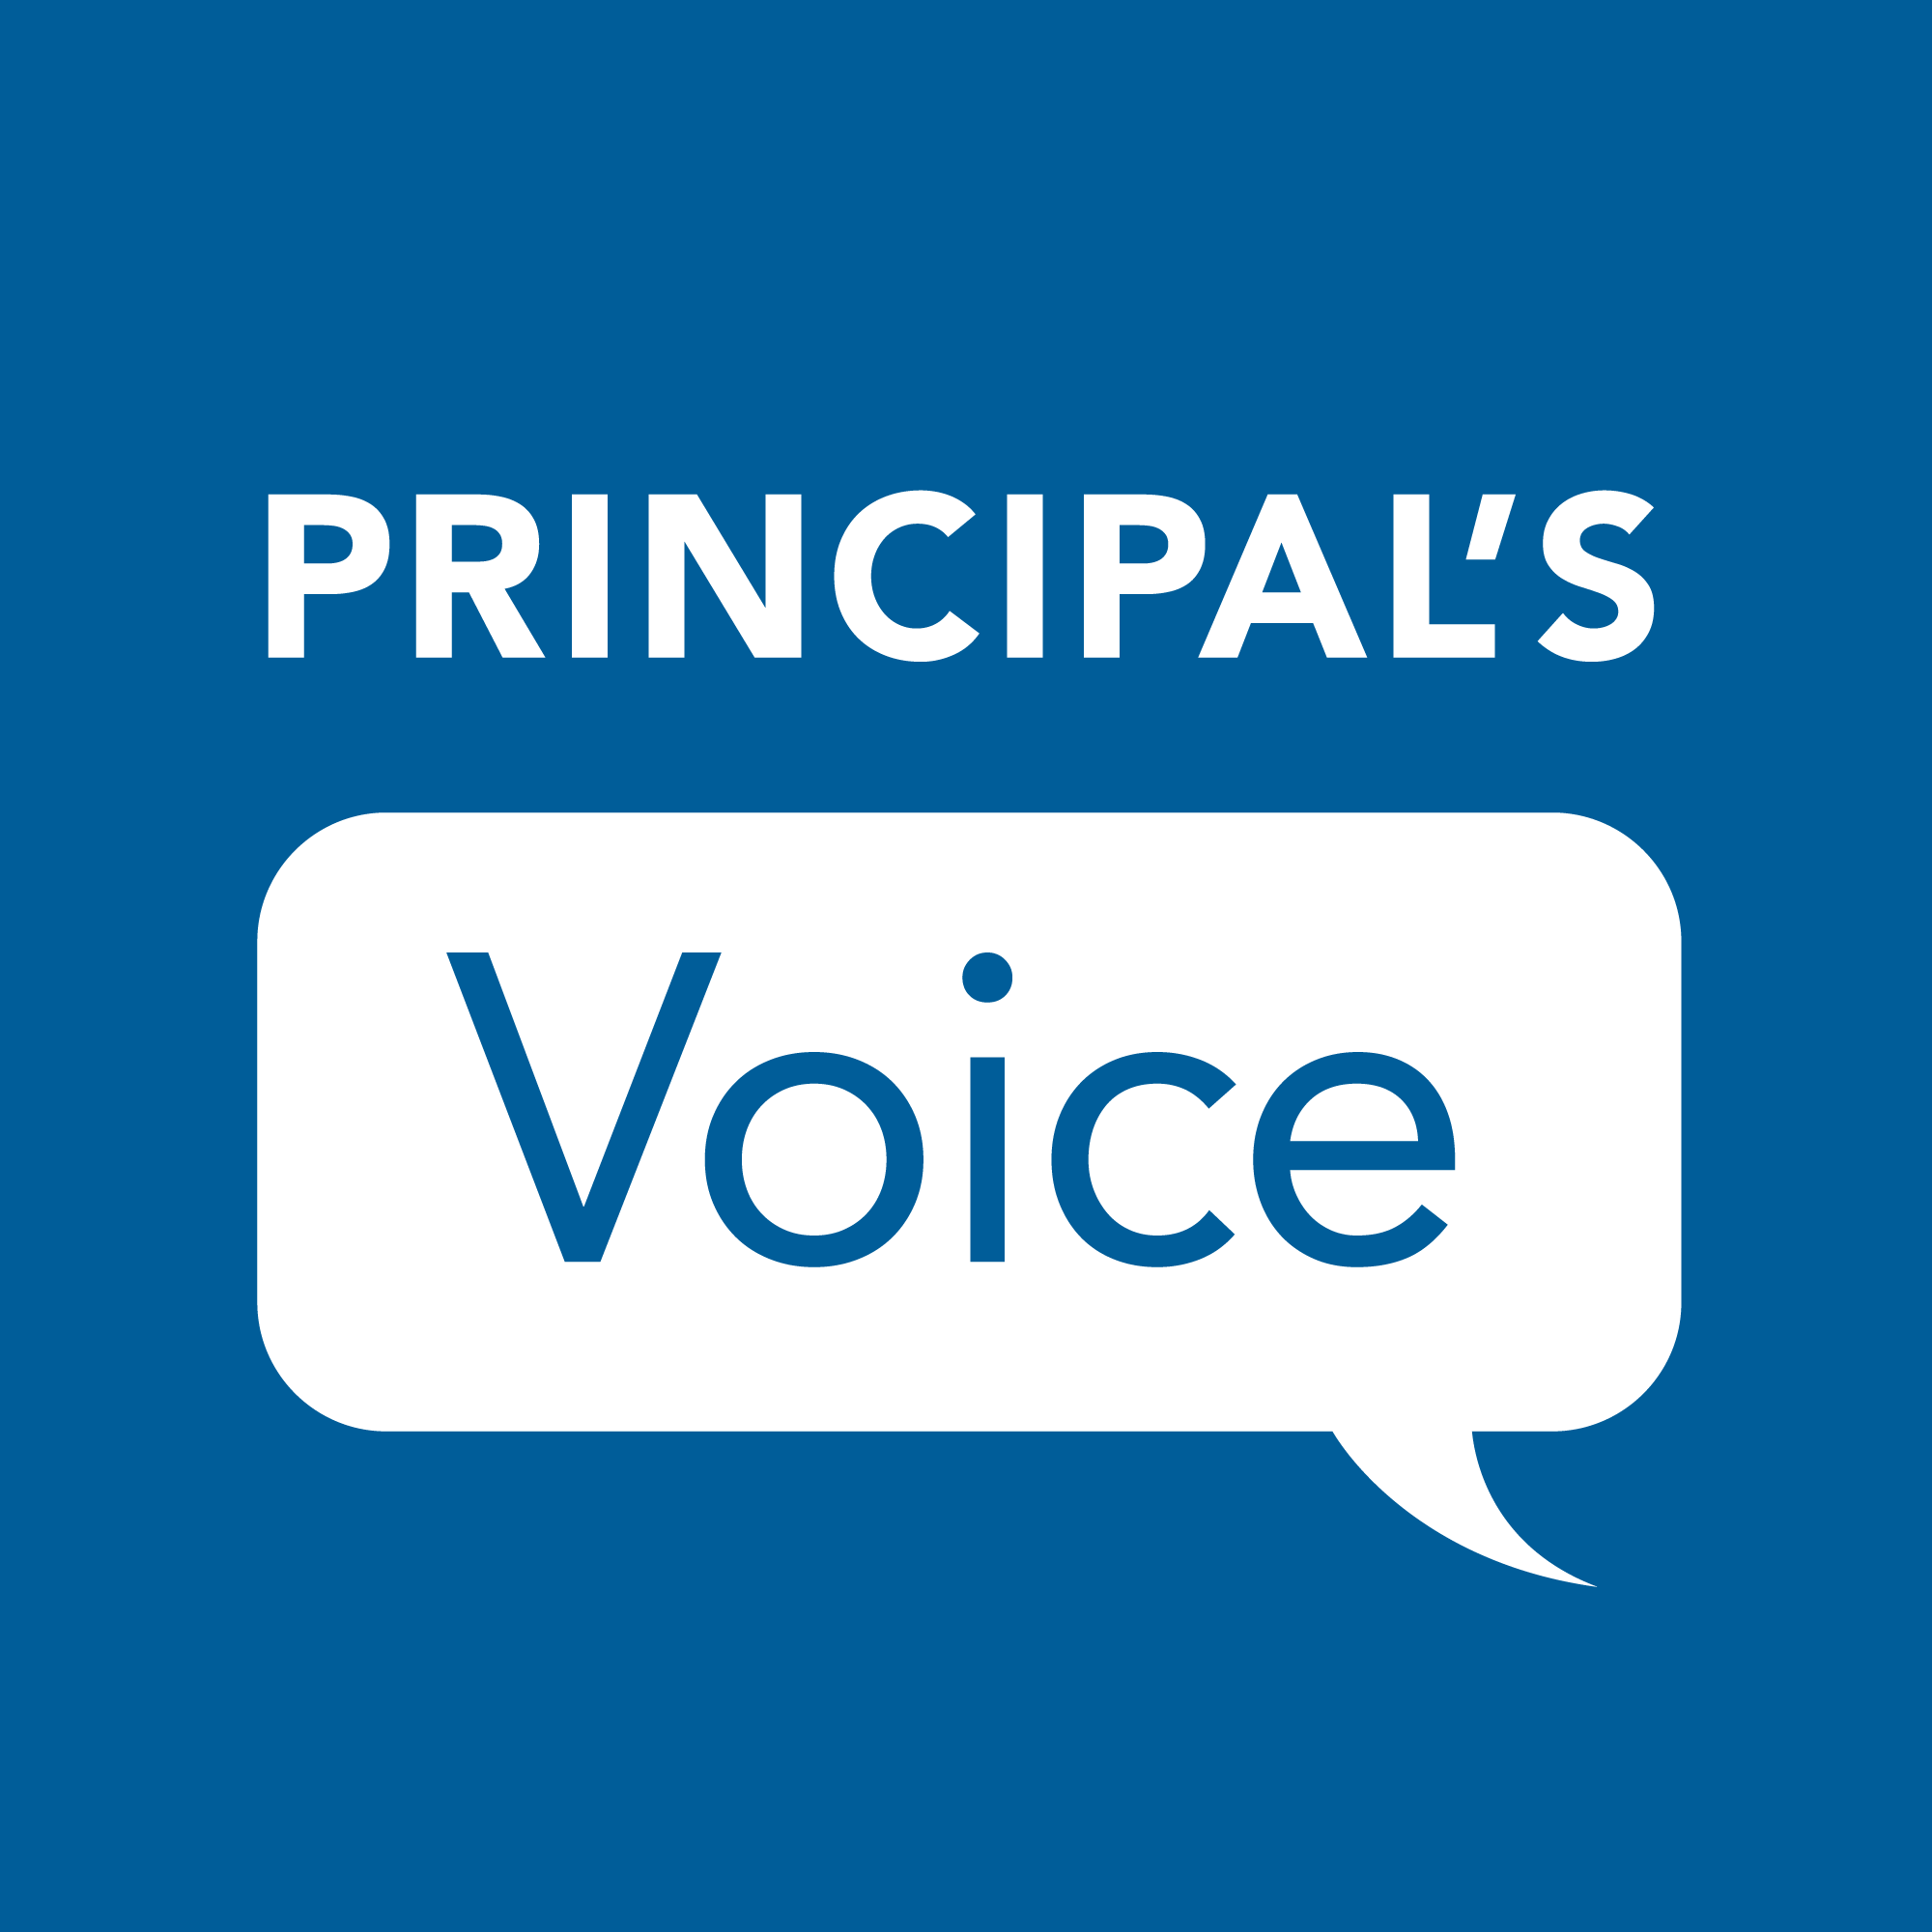 The Principal's Voice Podcast